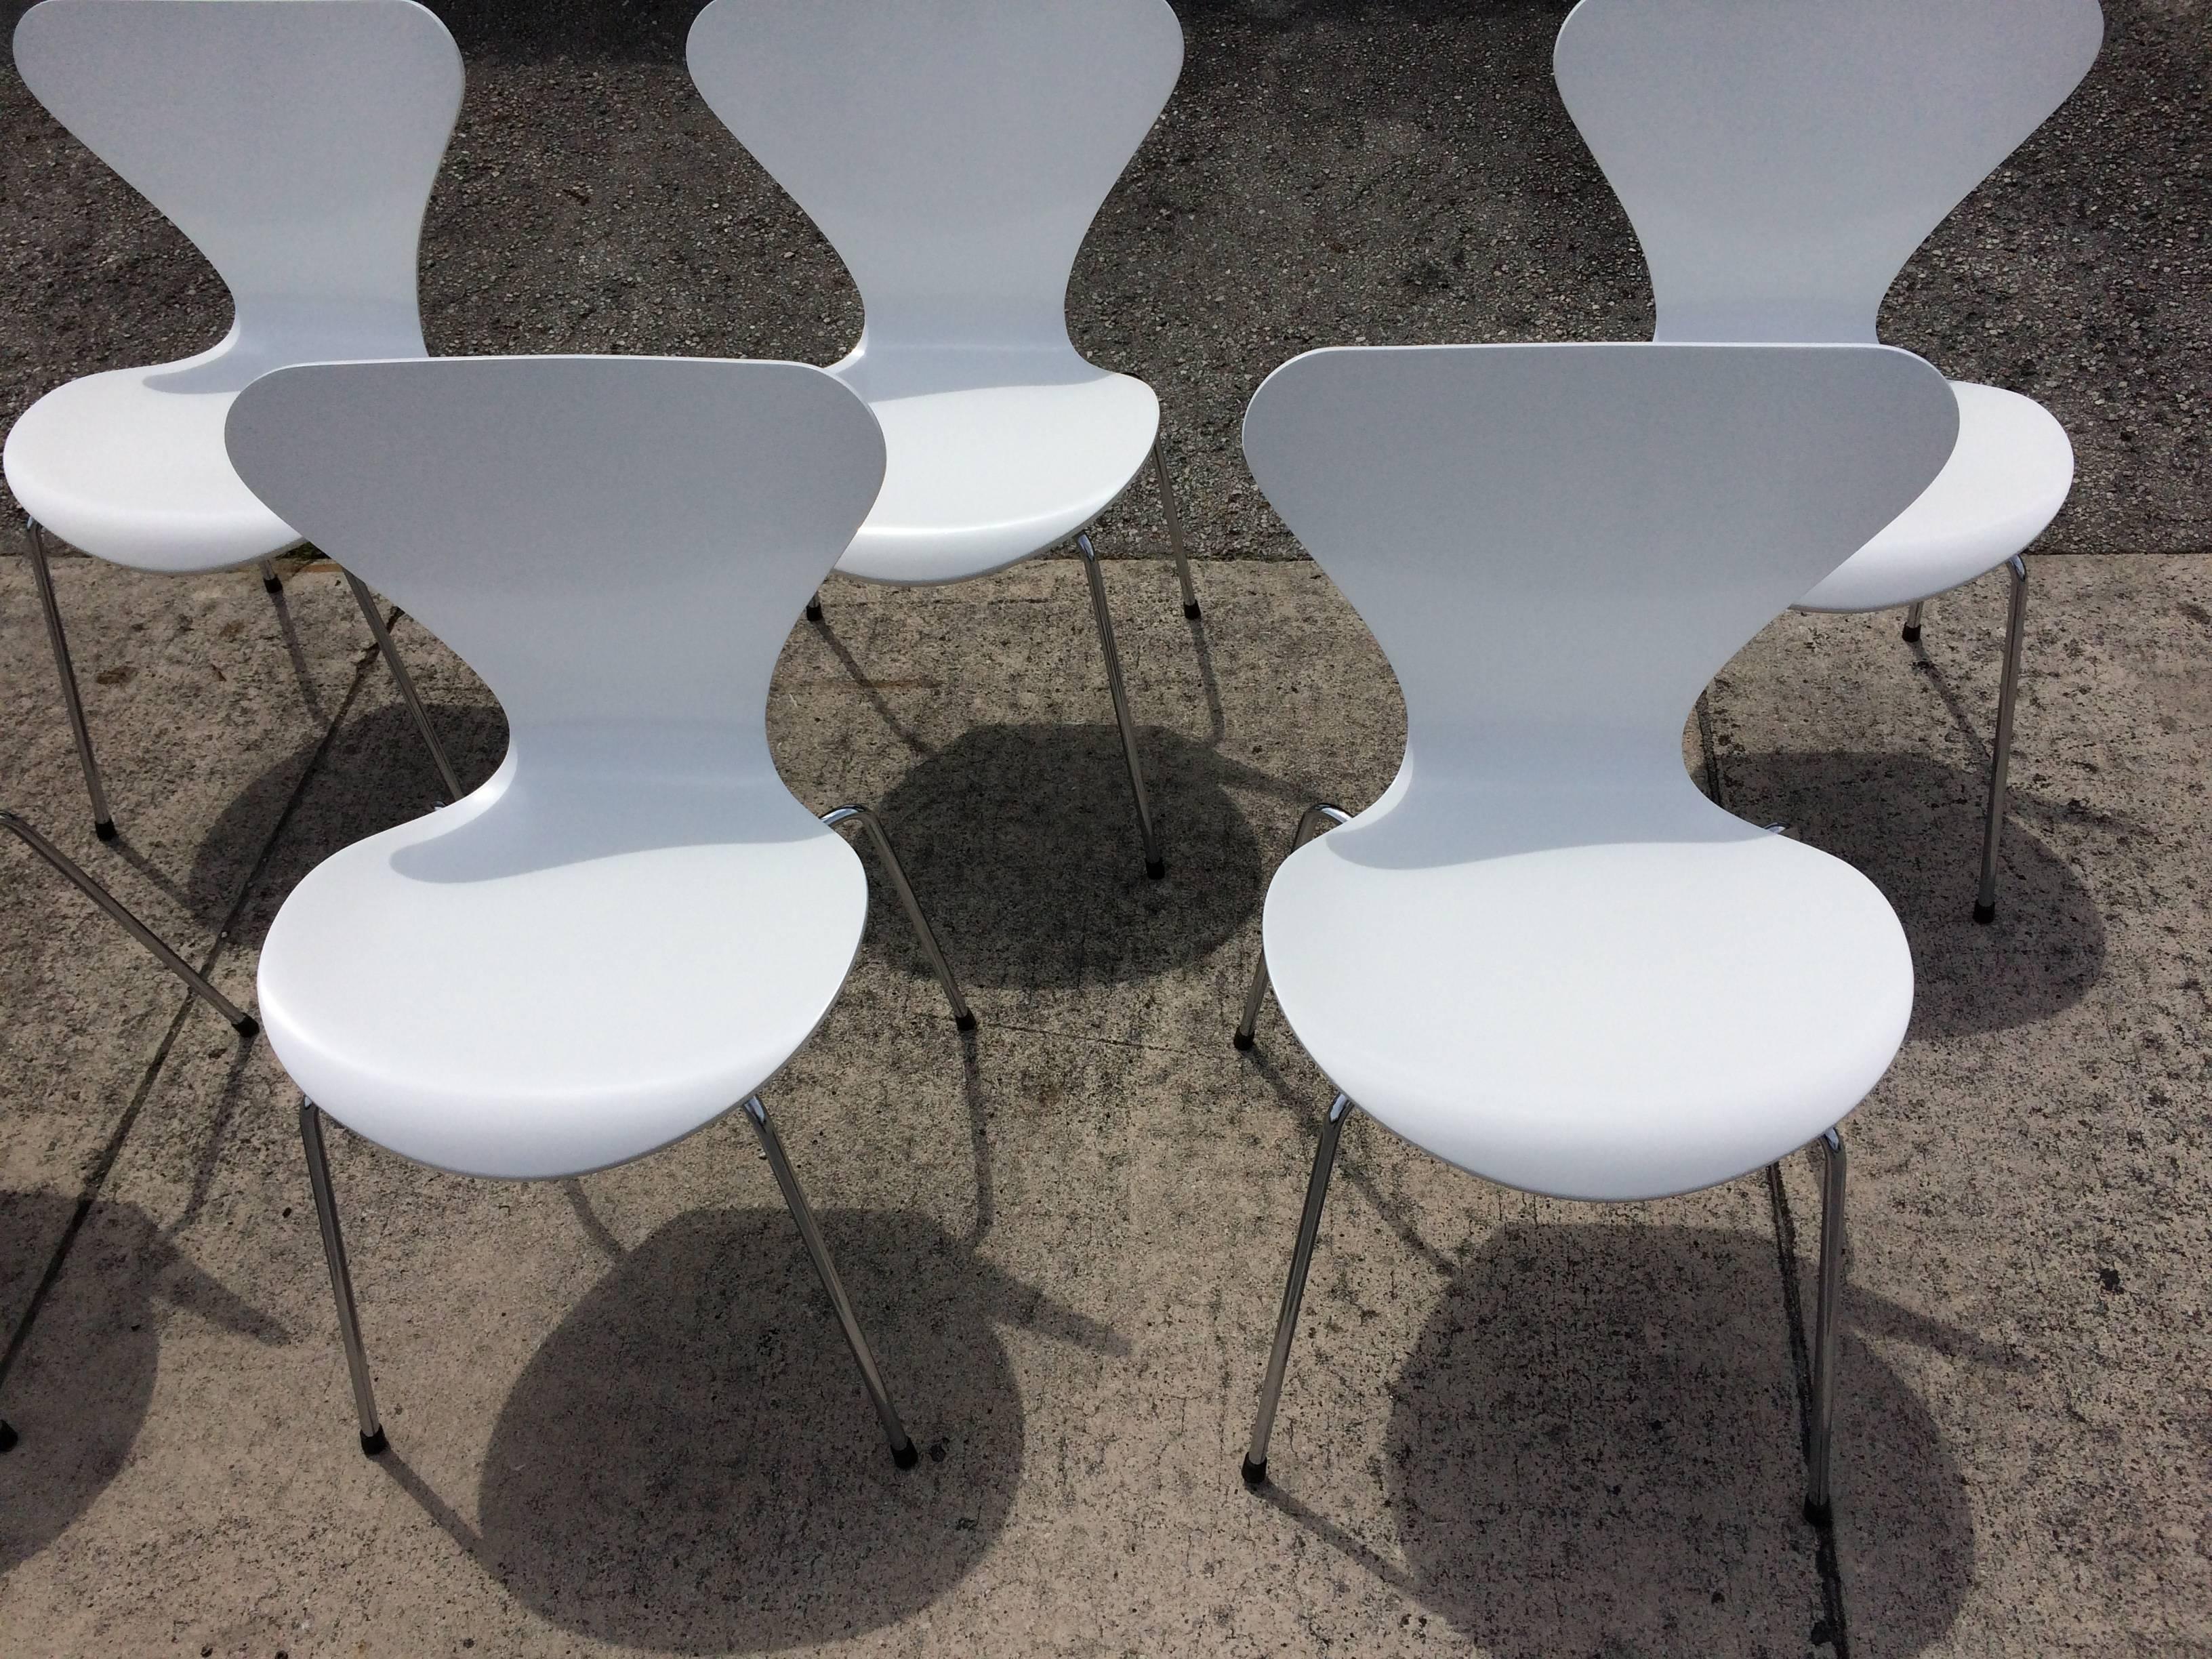 six Arne Jacobsen chairs Series 7 for Fritz Hansen, more available in white.
The chairs are stackable.